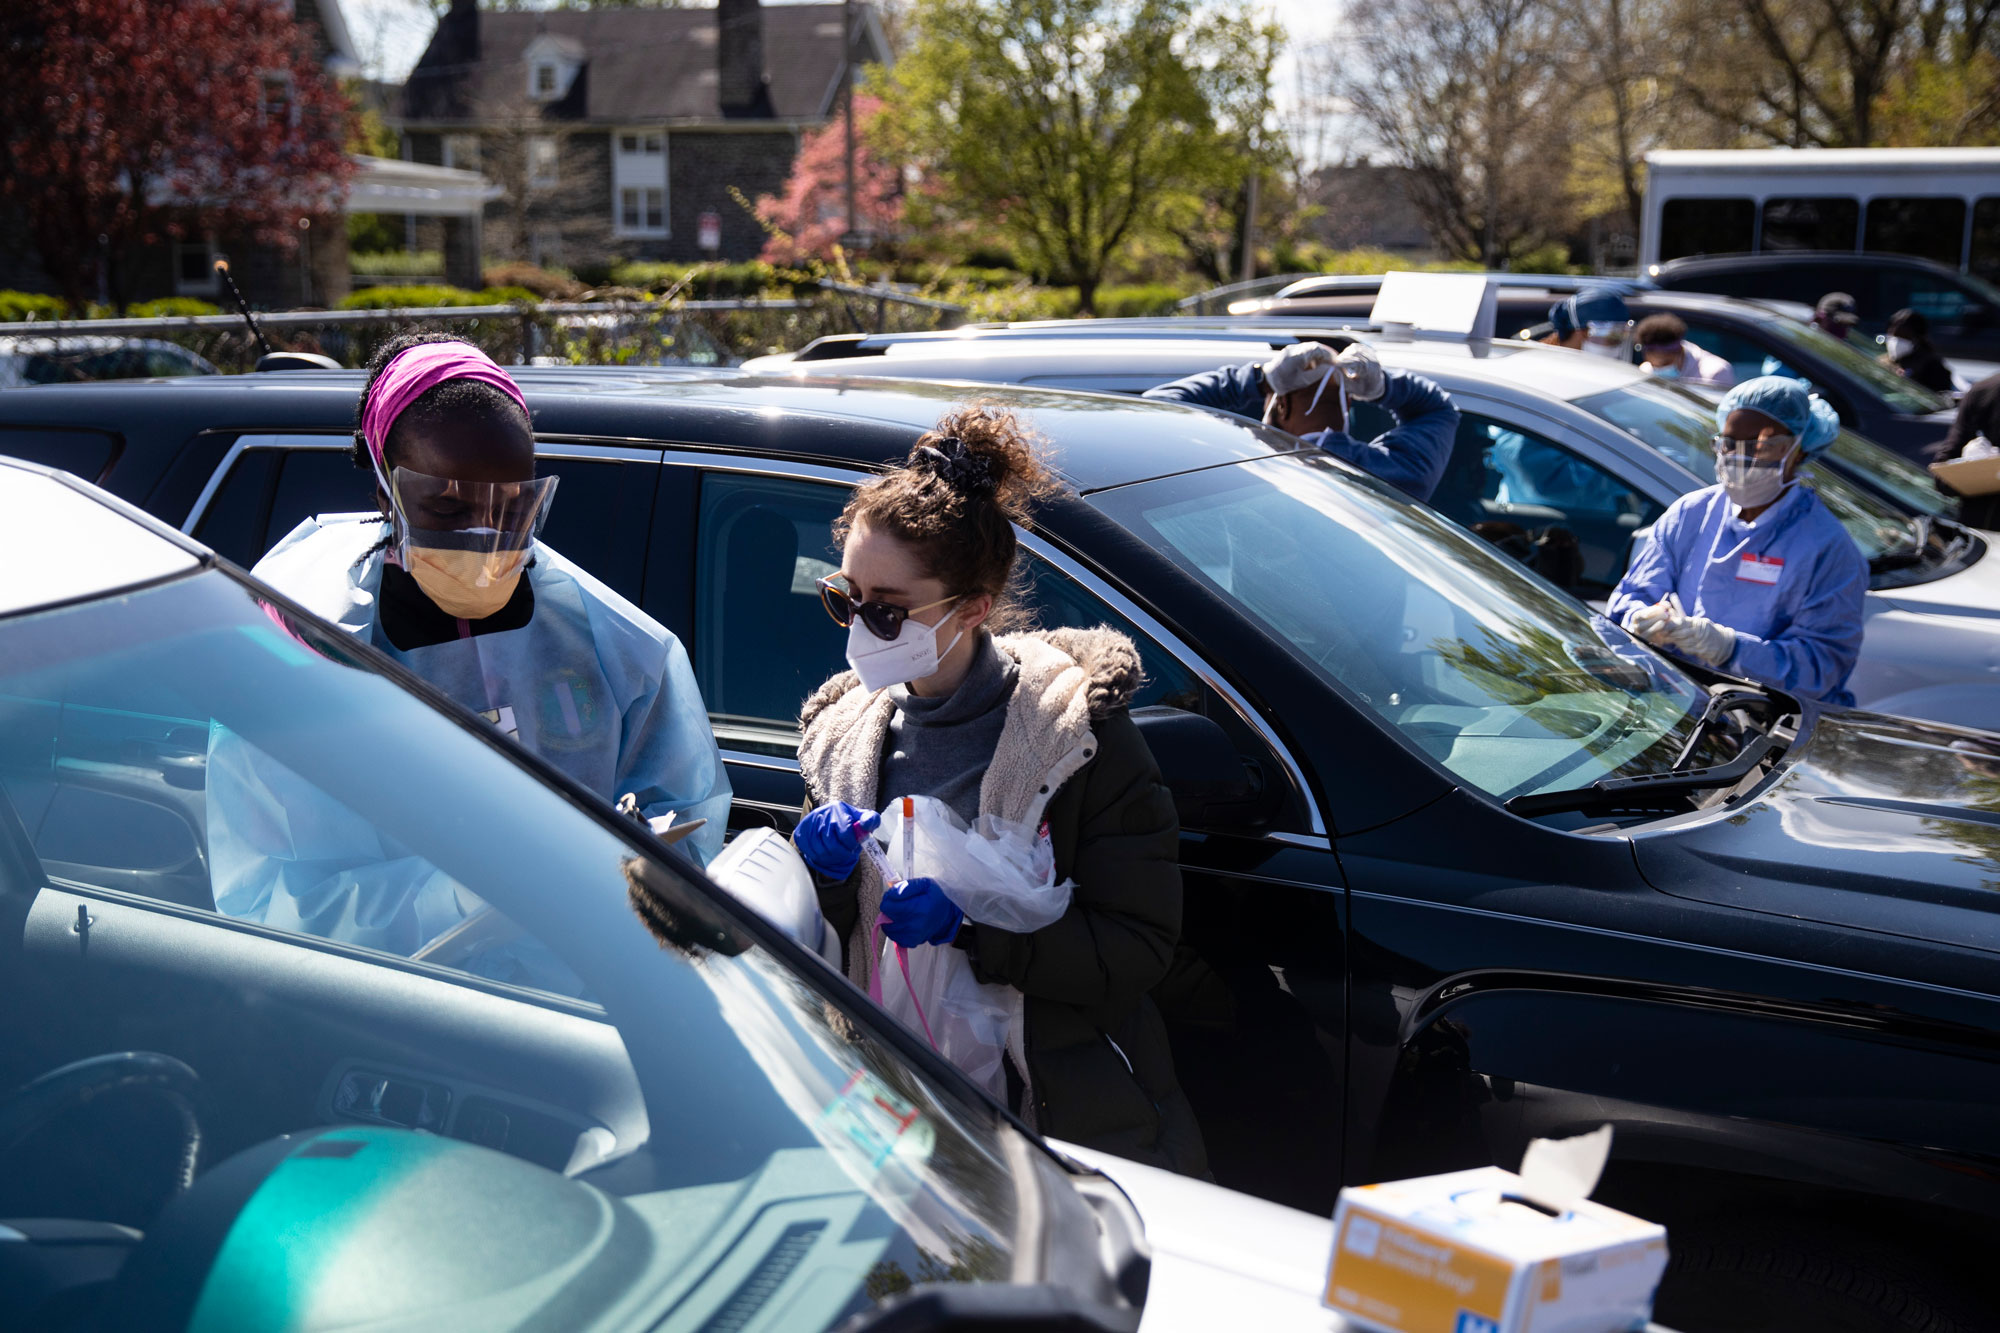 Dr. Ala Stanford, left, assisted by medical student Tal Lee, prepares to administer a COVID-19 swab test on a person in the parking lot of Pinn Memorial Baptist Church in Philadelphia, April 22.